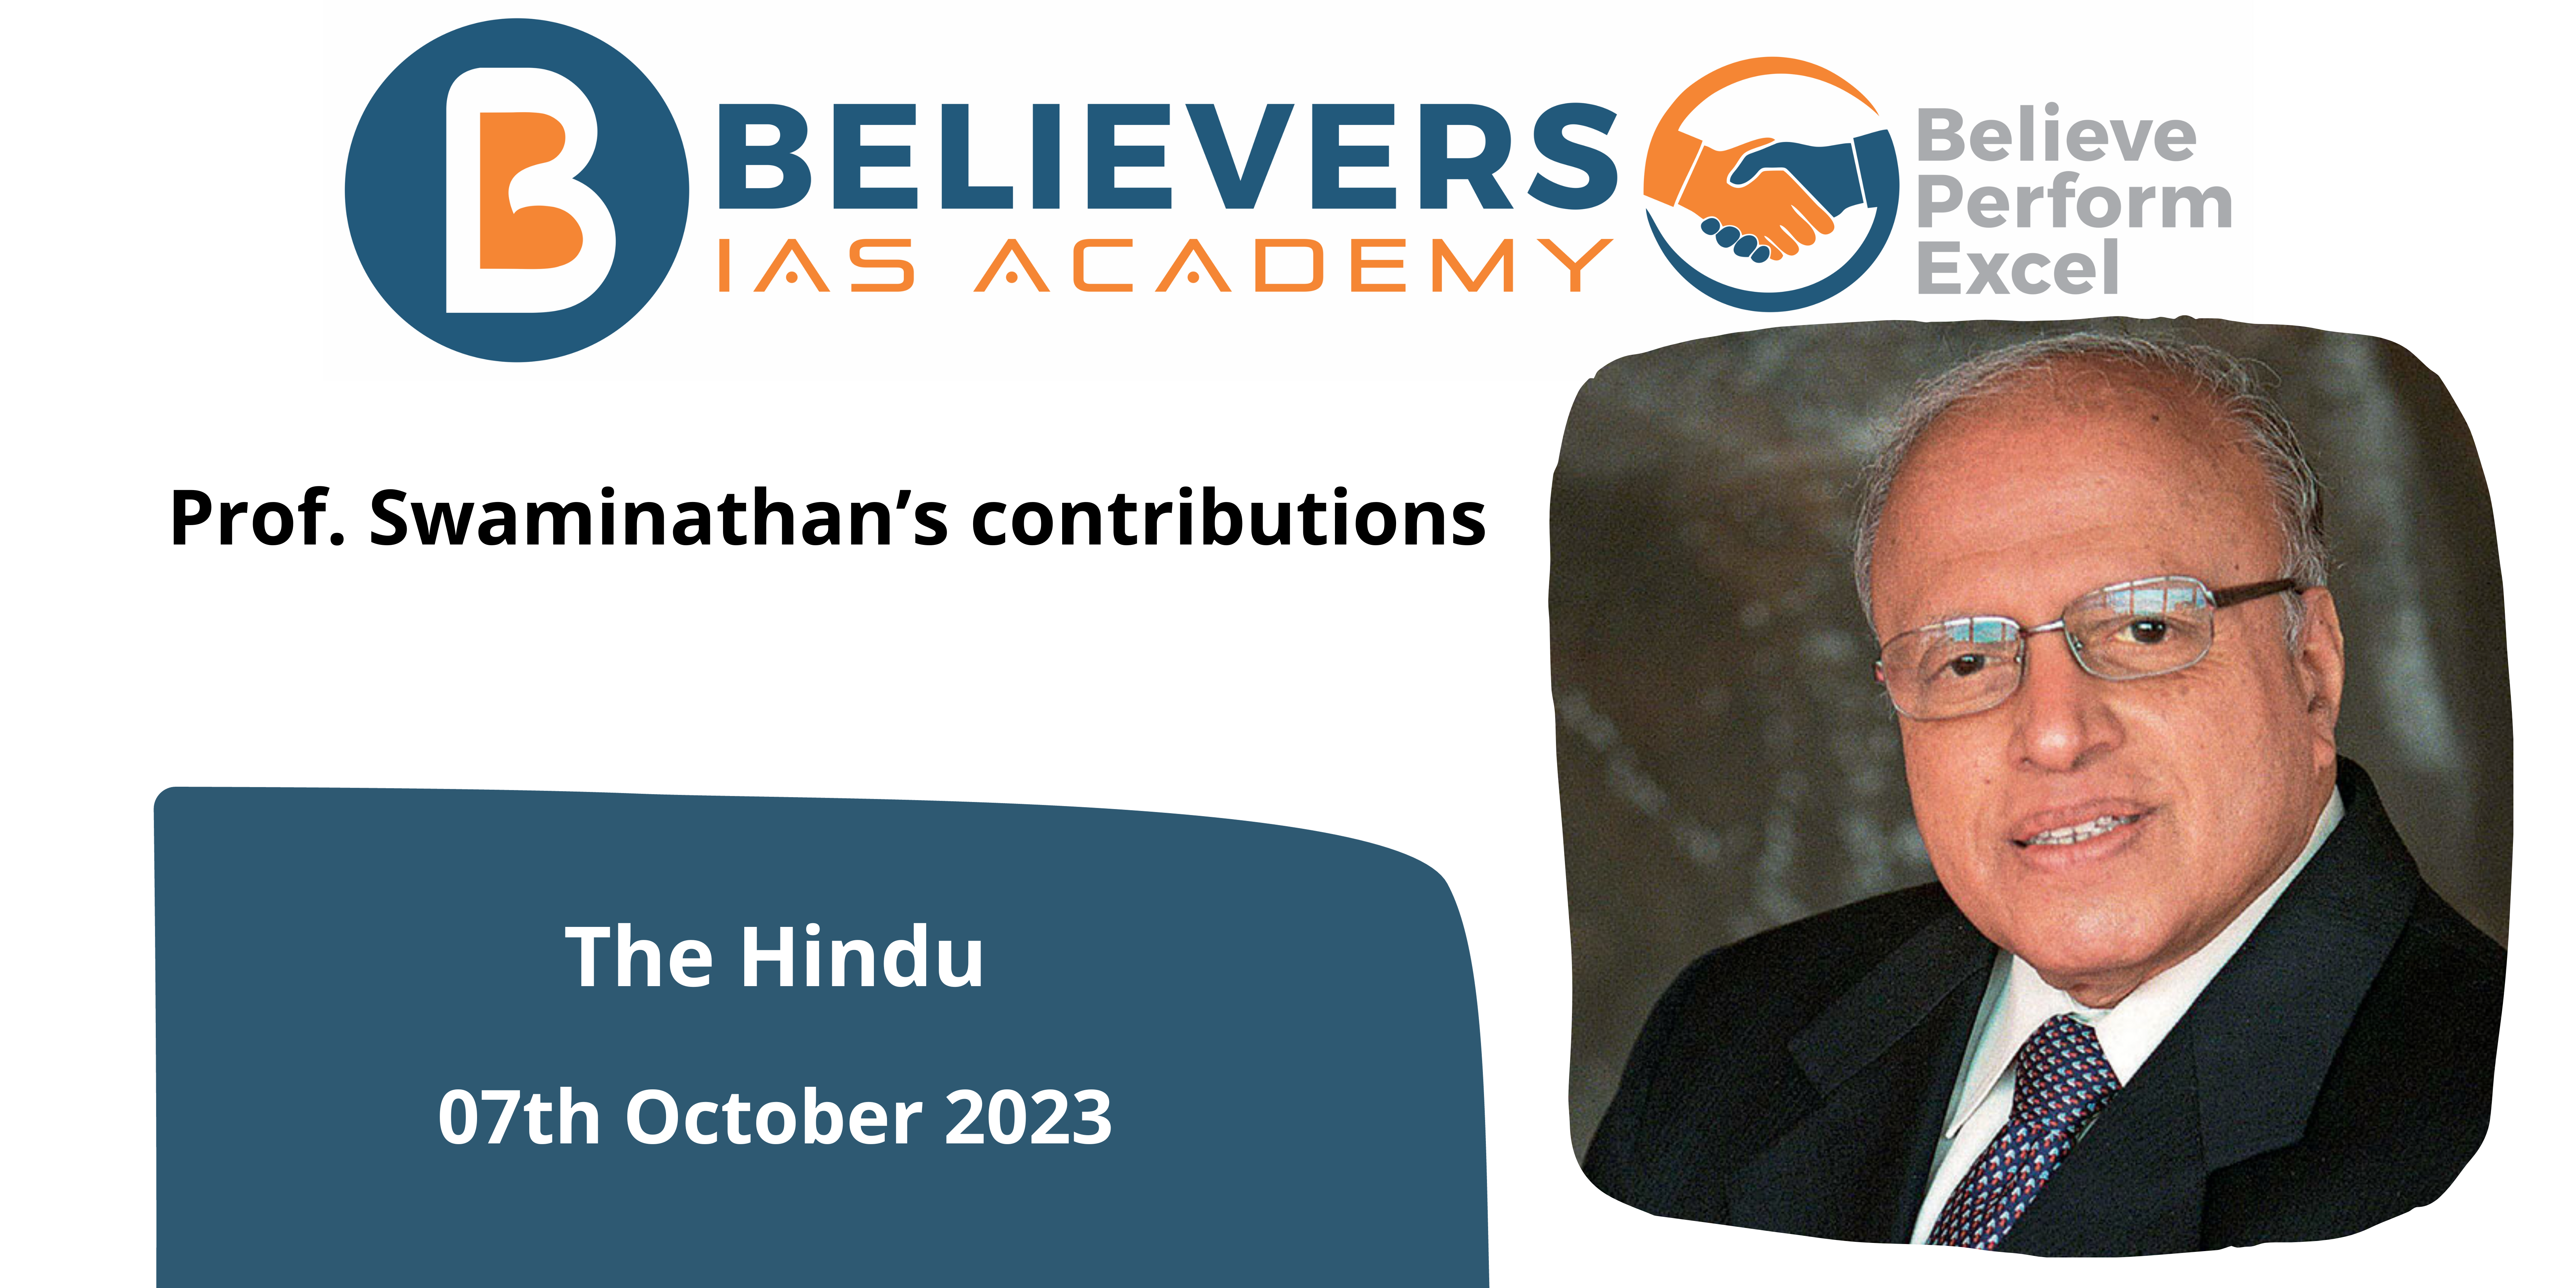 Prof. Swaminathan’s contributions